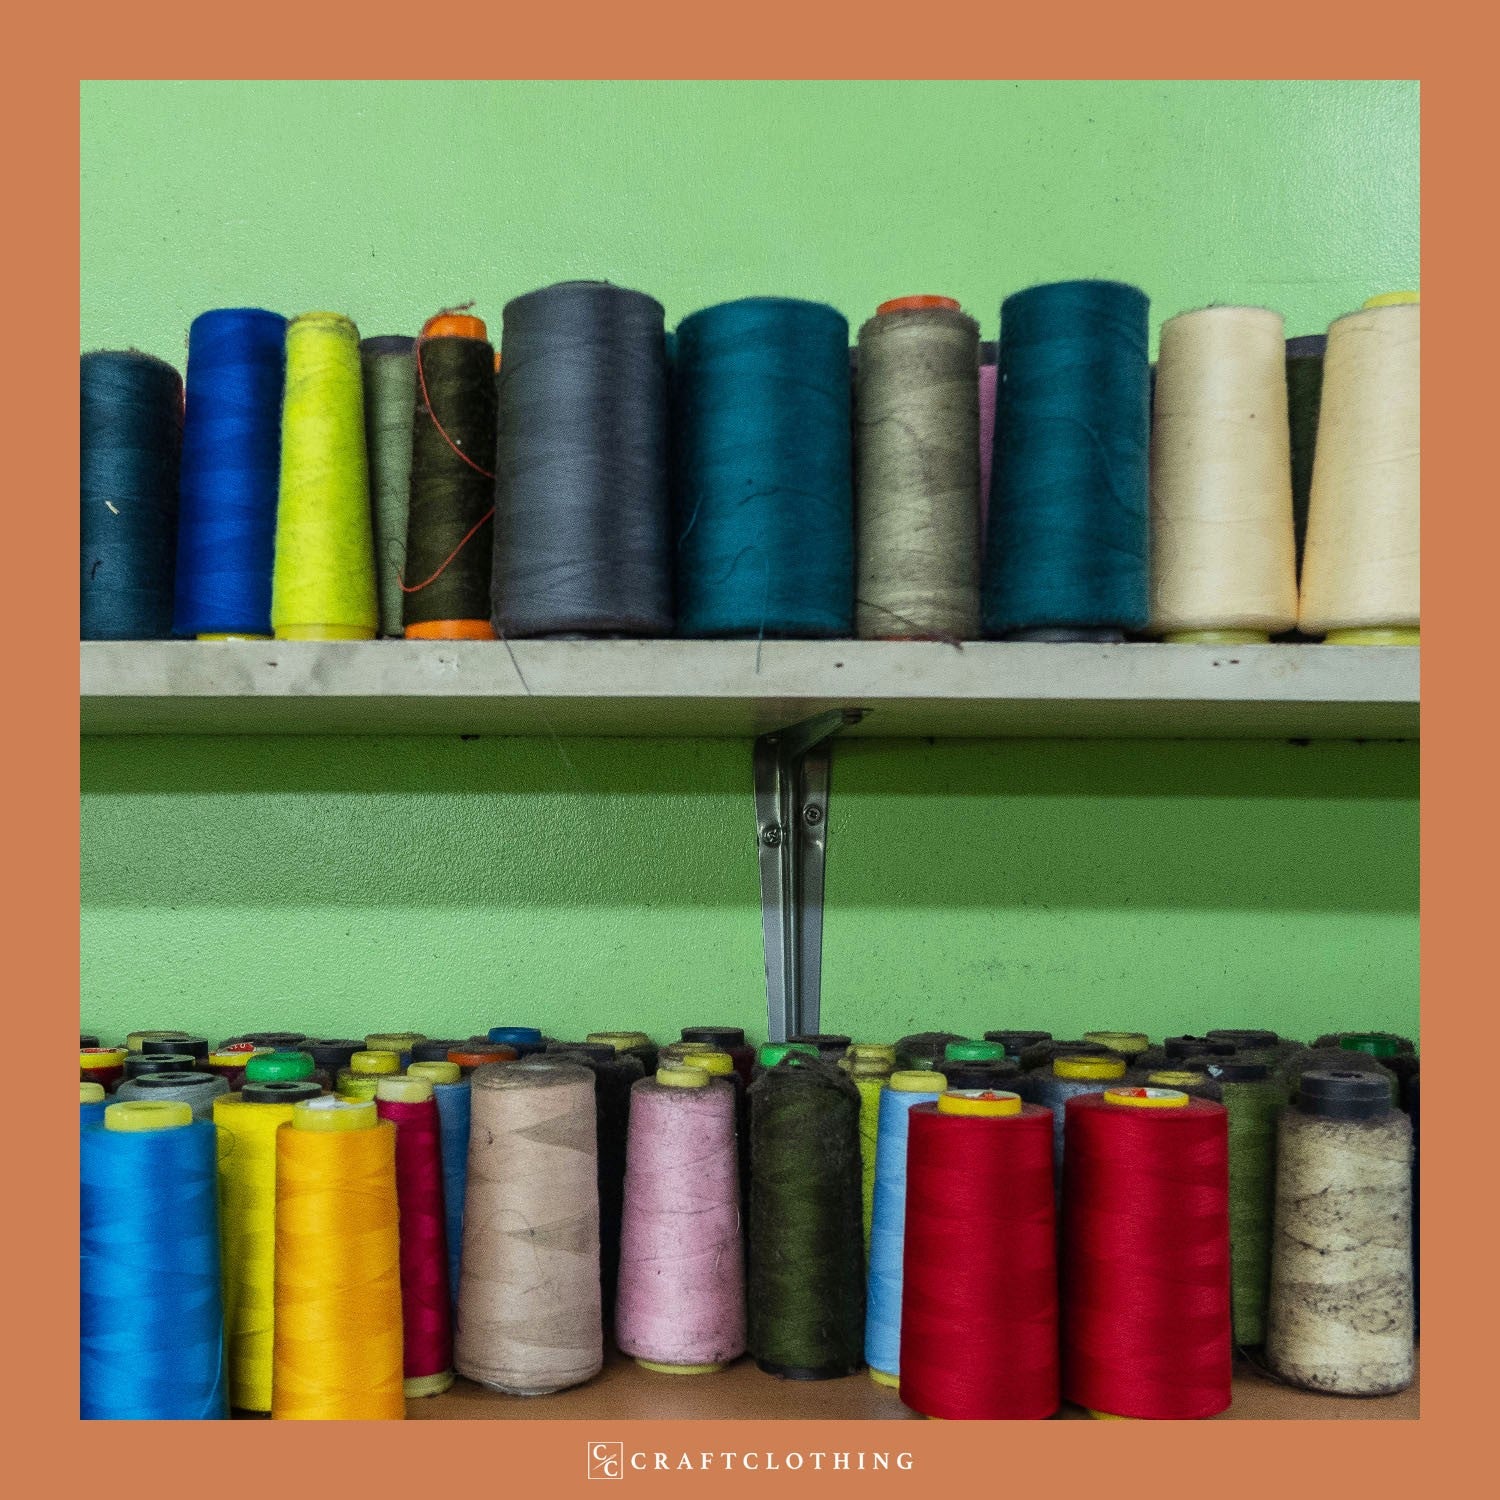 We have almost all thread colours in different shades and pantones.